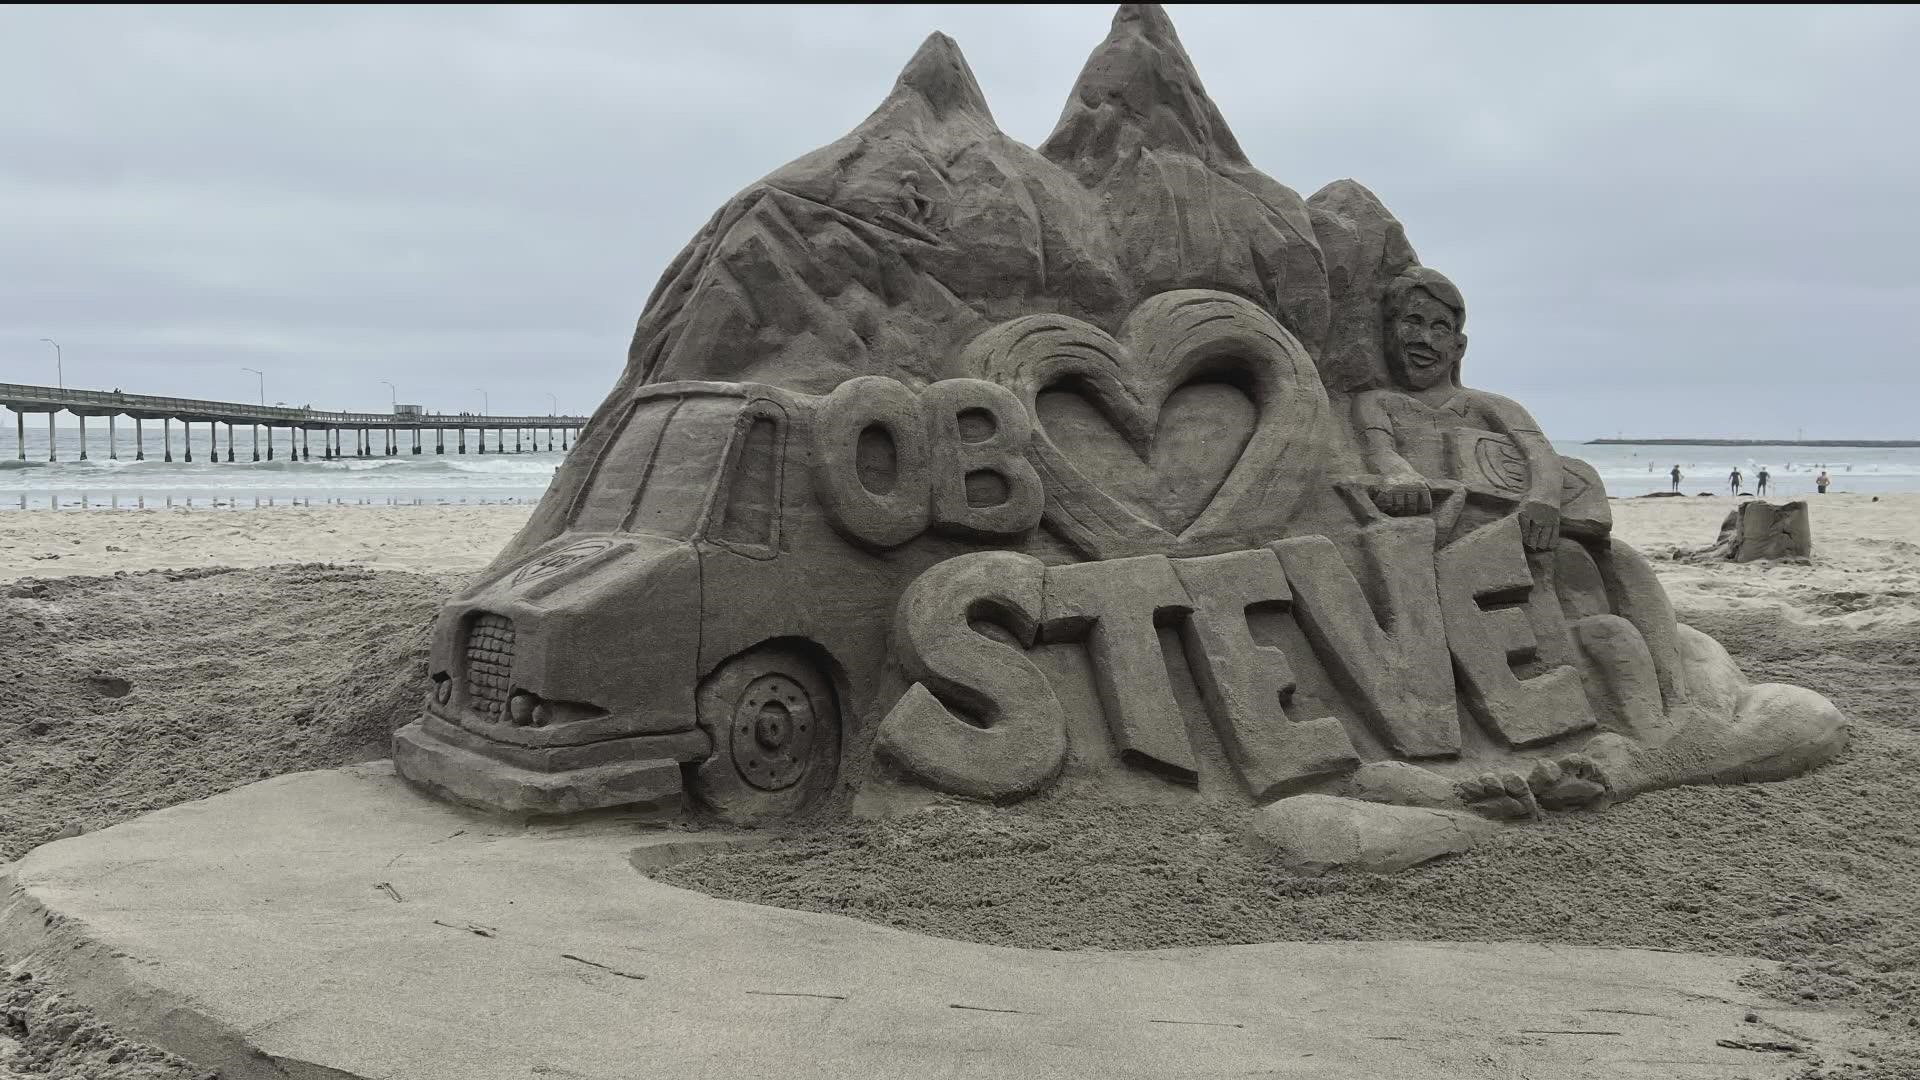 Steve Krueger, a beloved UPS driver killed on the job when a plane crashed into his truck in Santee, is being honored with a unique sand sculpture in Ocean Beach.